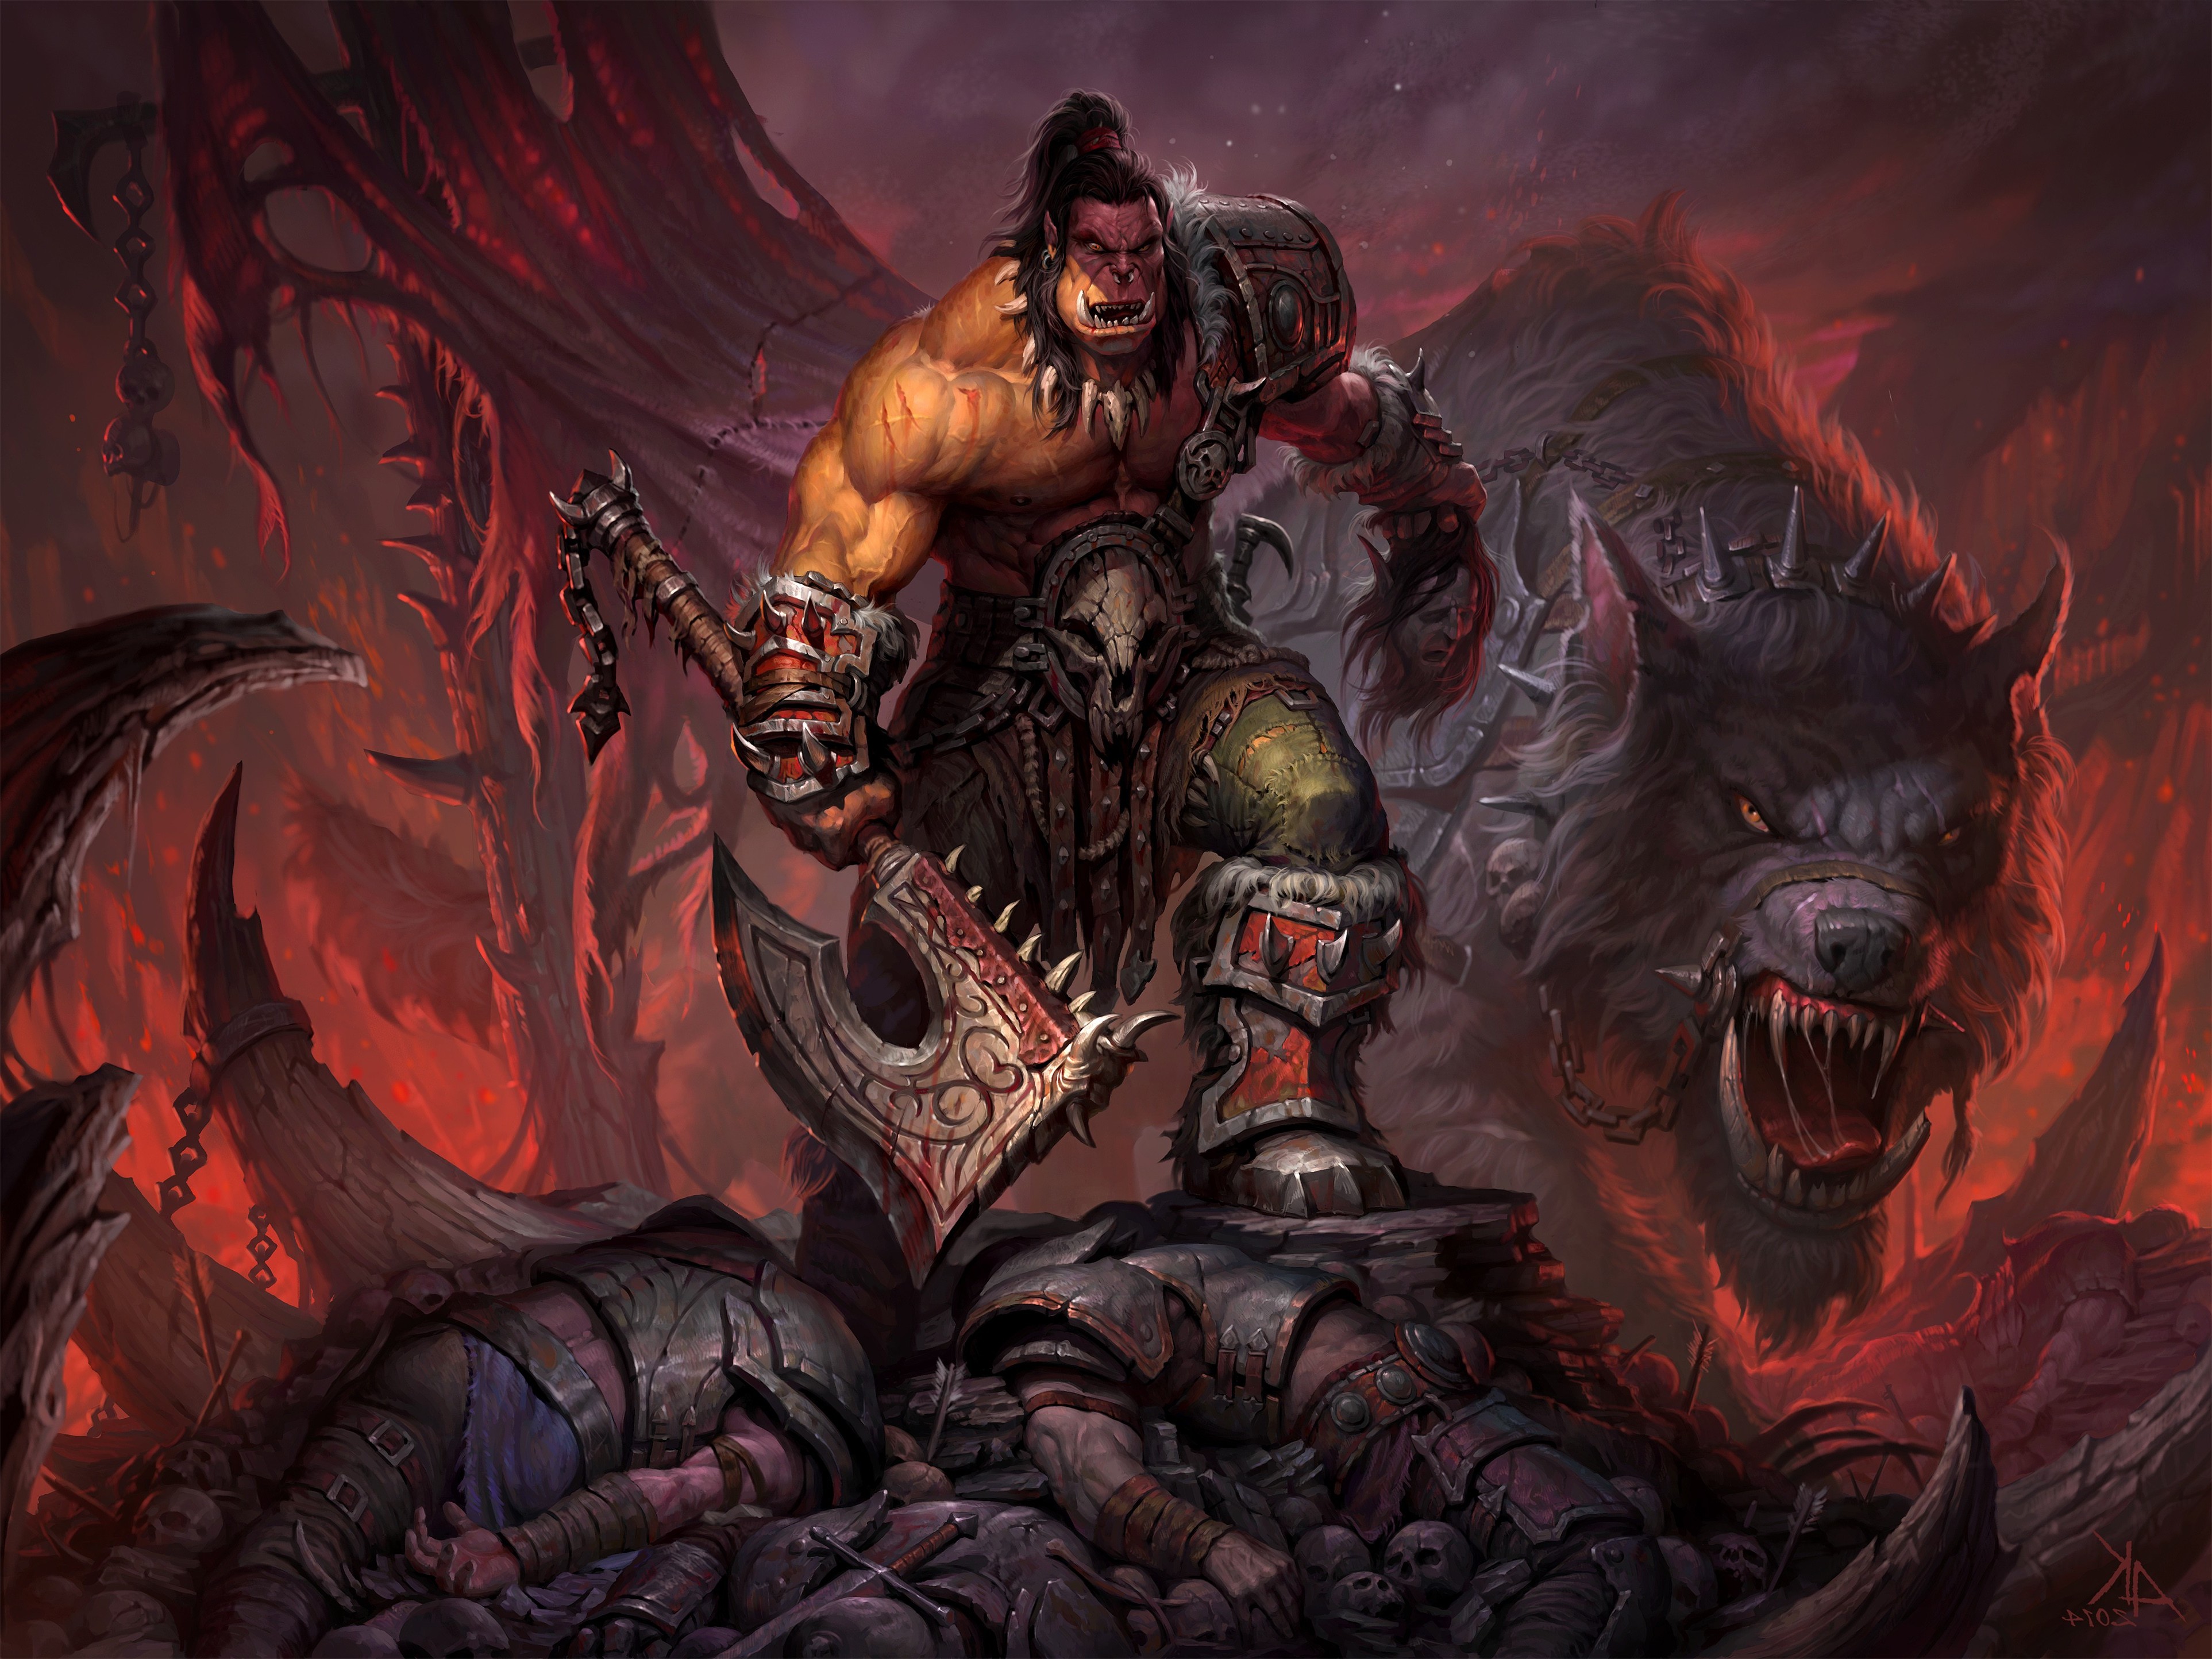 orcs, Axes, Creature, World Of Warcraft: Warlords Of Draenor, Grommash Hellscream Wallpaper